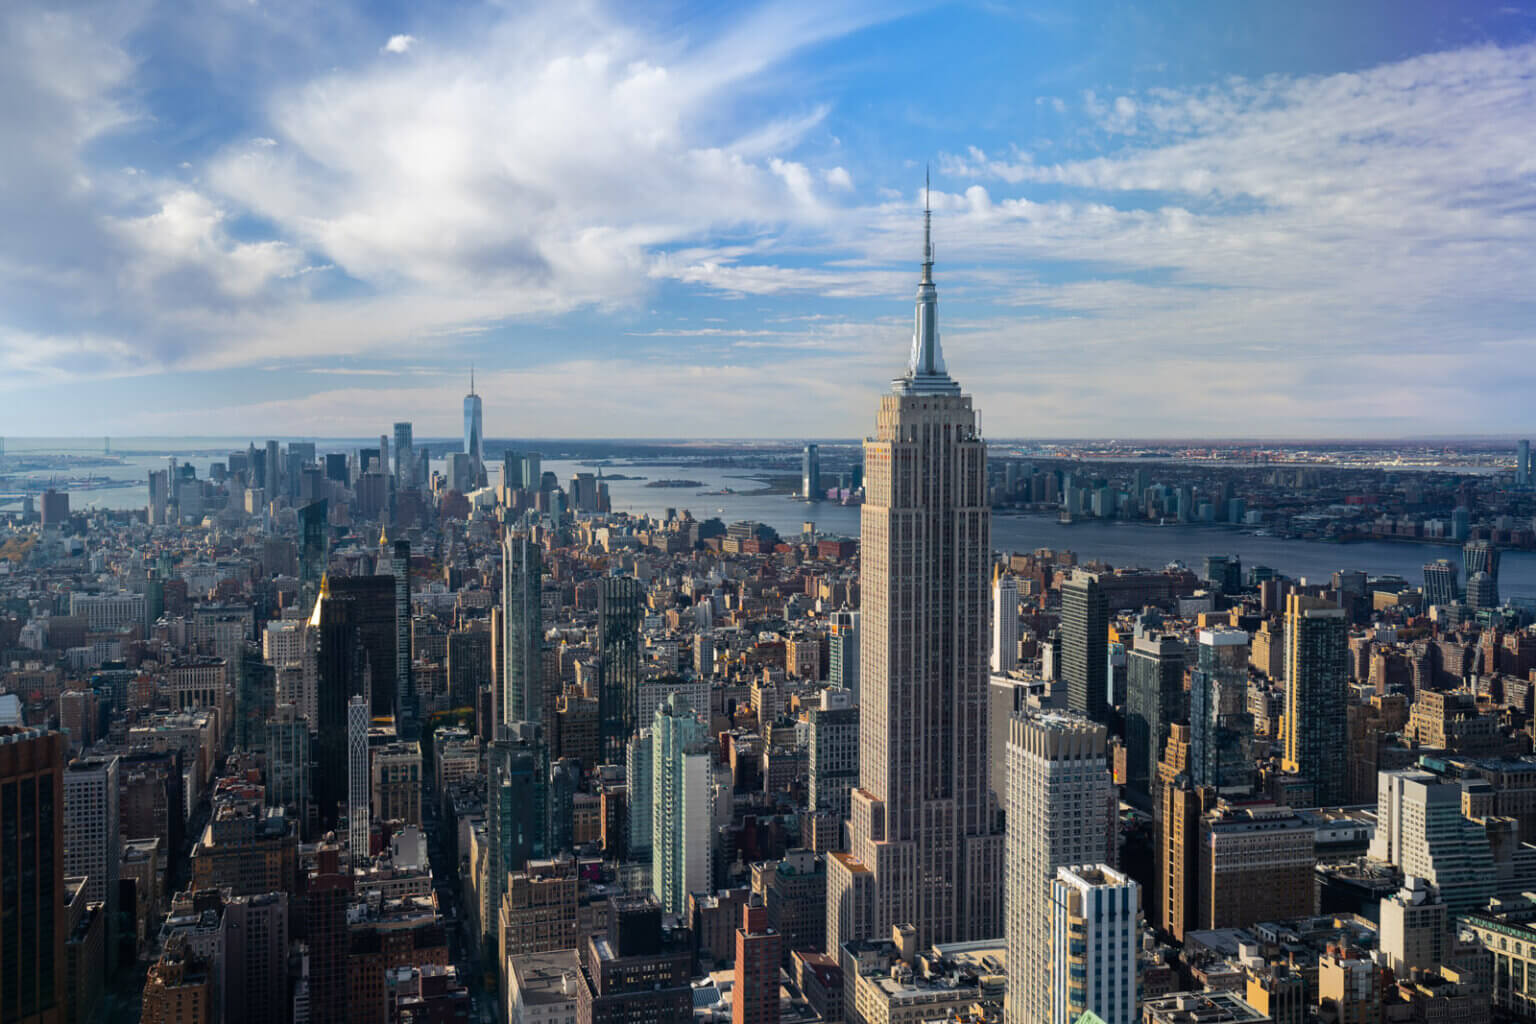 view of Empire State Building and Lower Manhattan and World Trade Center from Summit One Vanderbilt in NYC